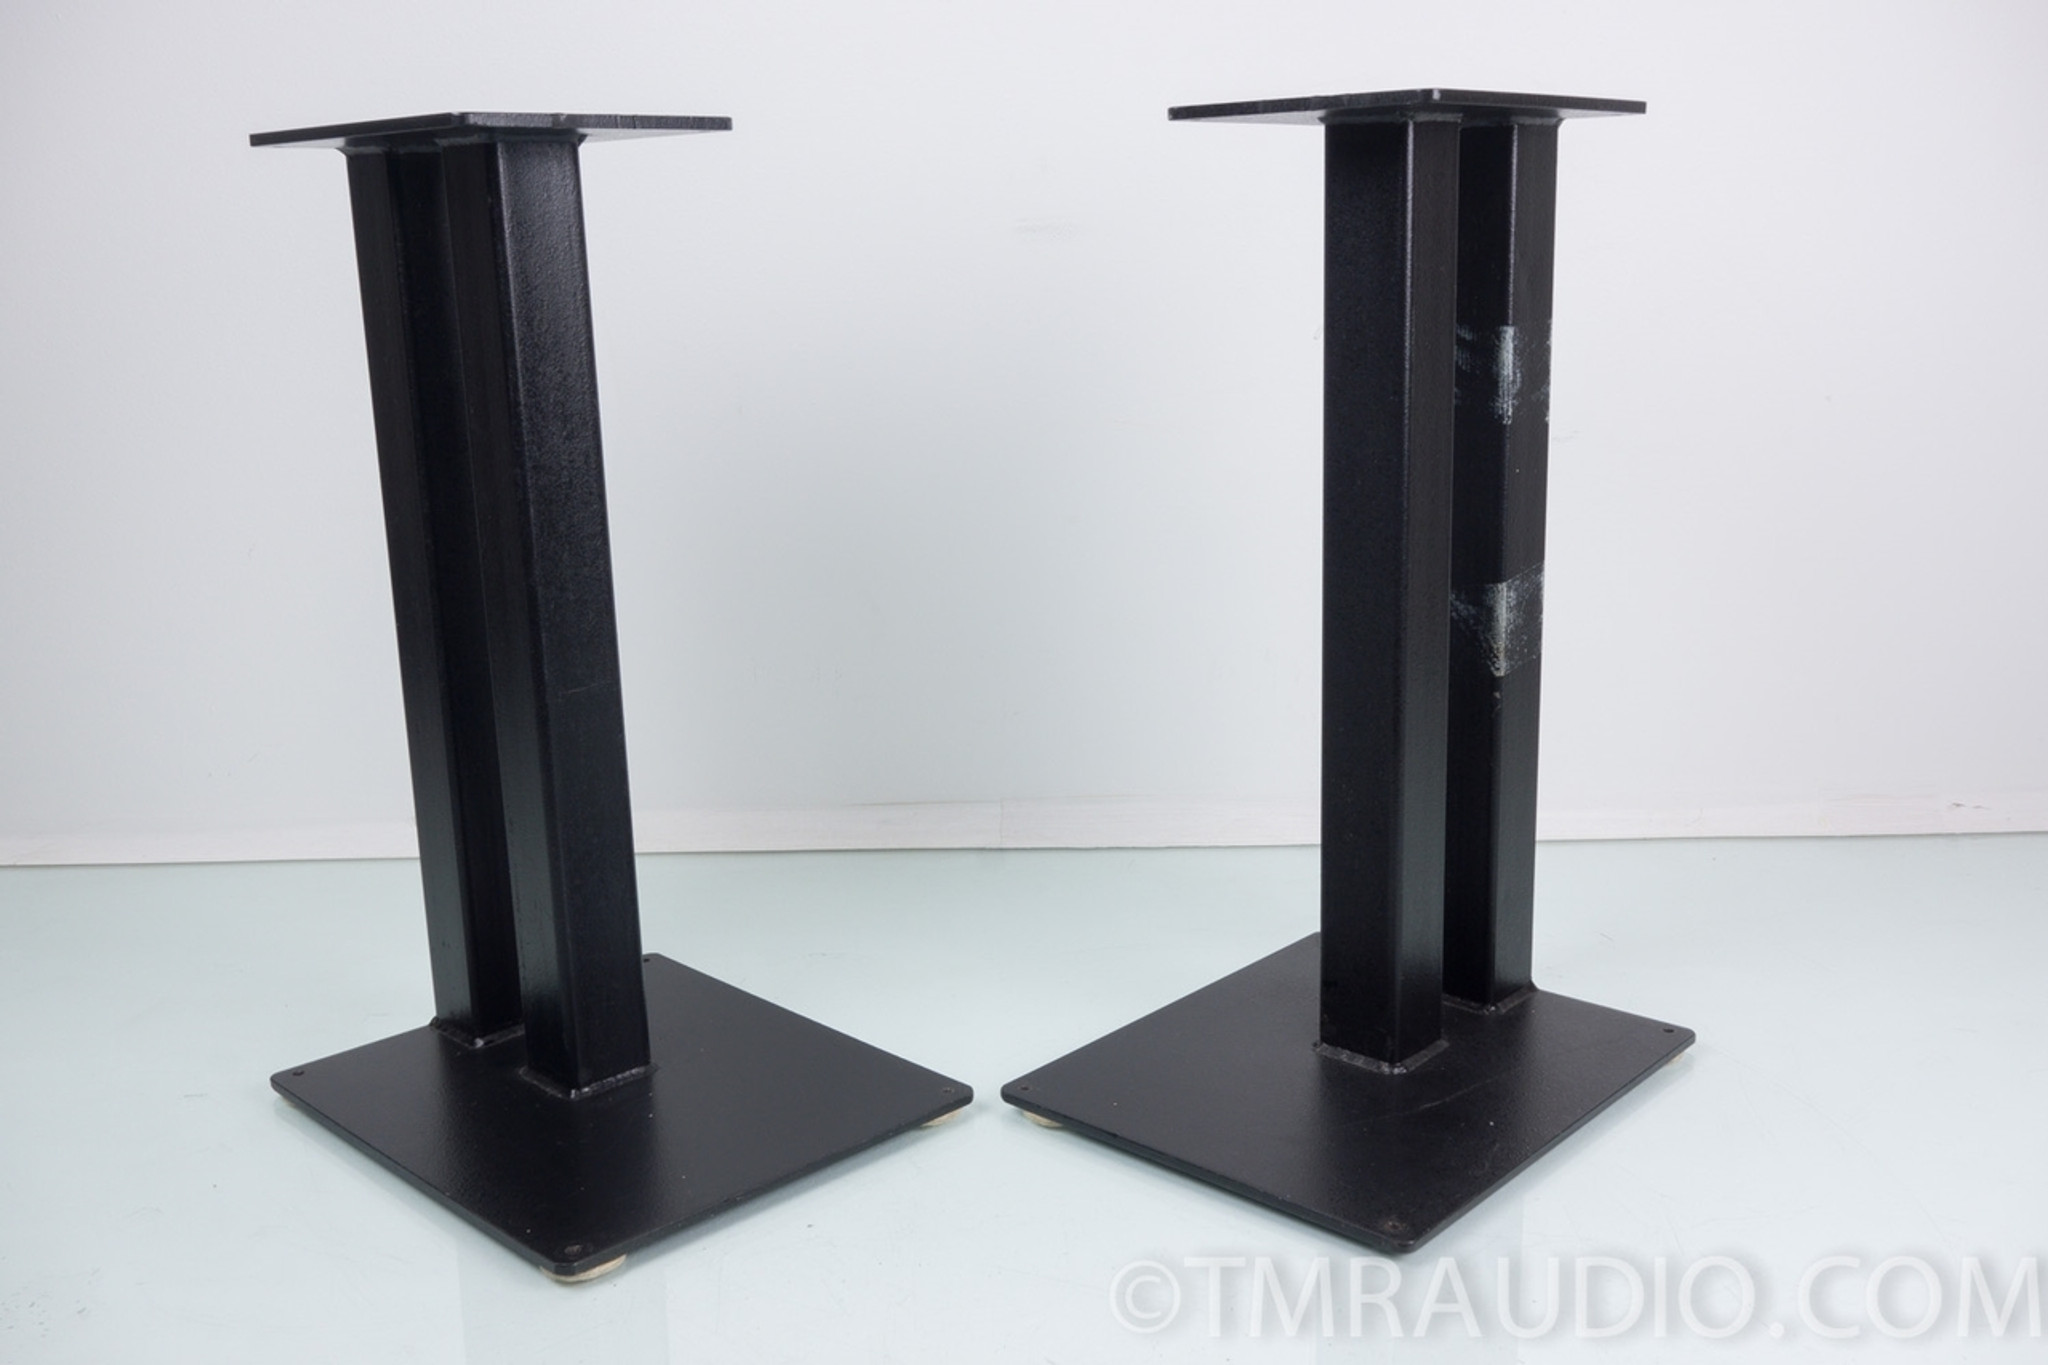  Ccsh Speaker Stand Extra Tall Speaker Stands - 20cm